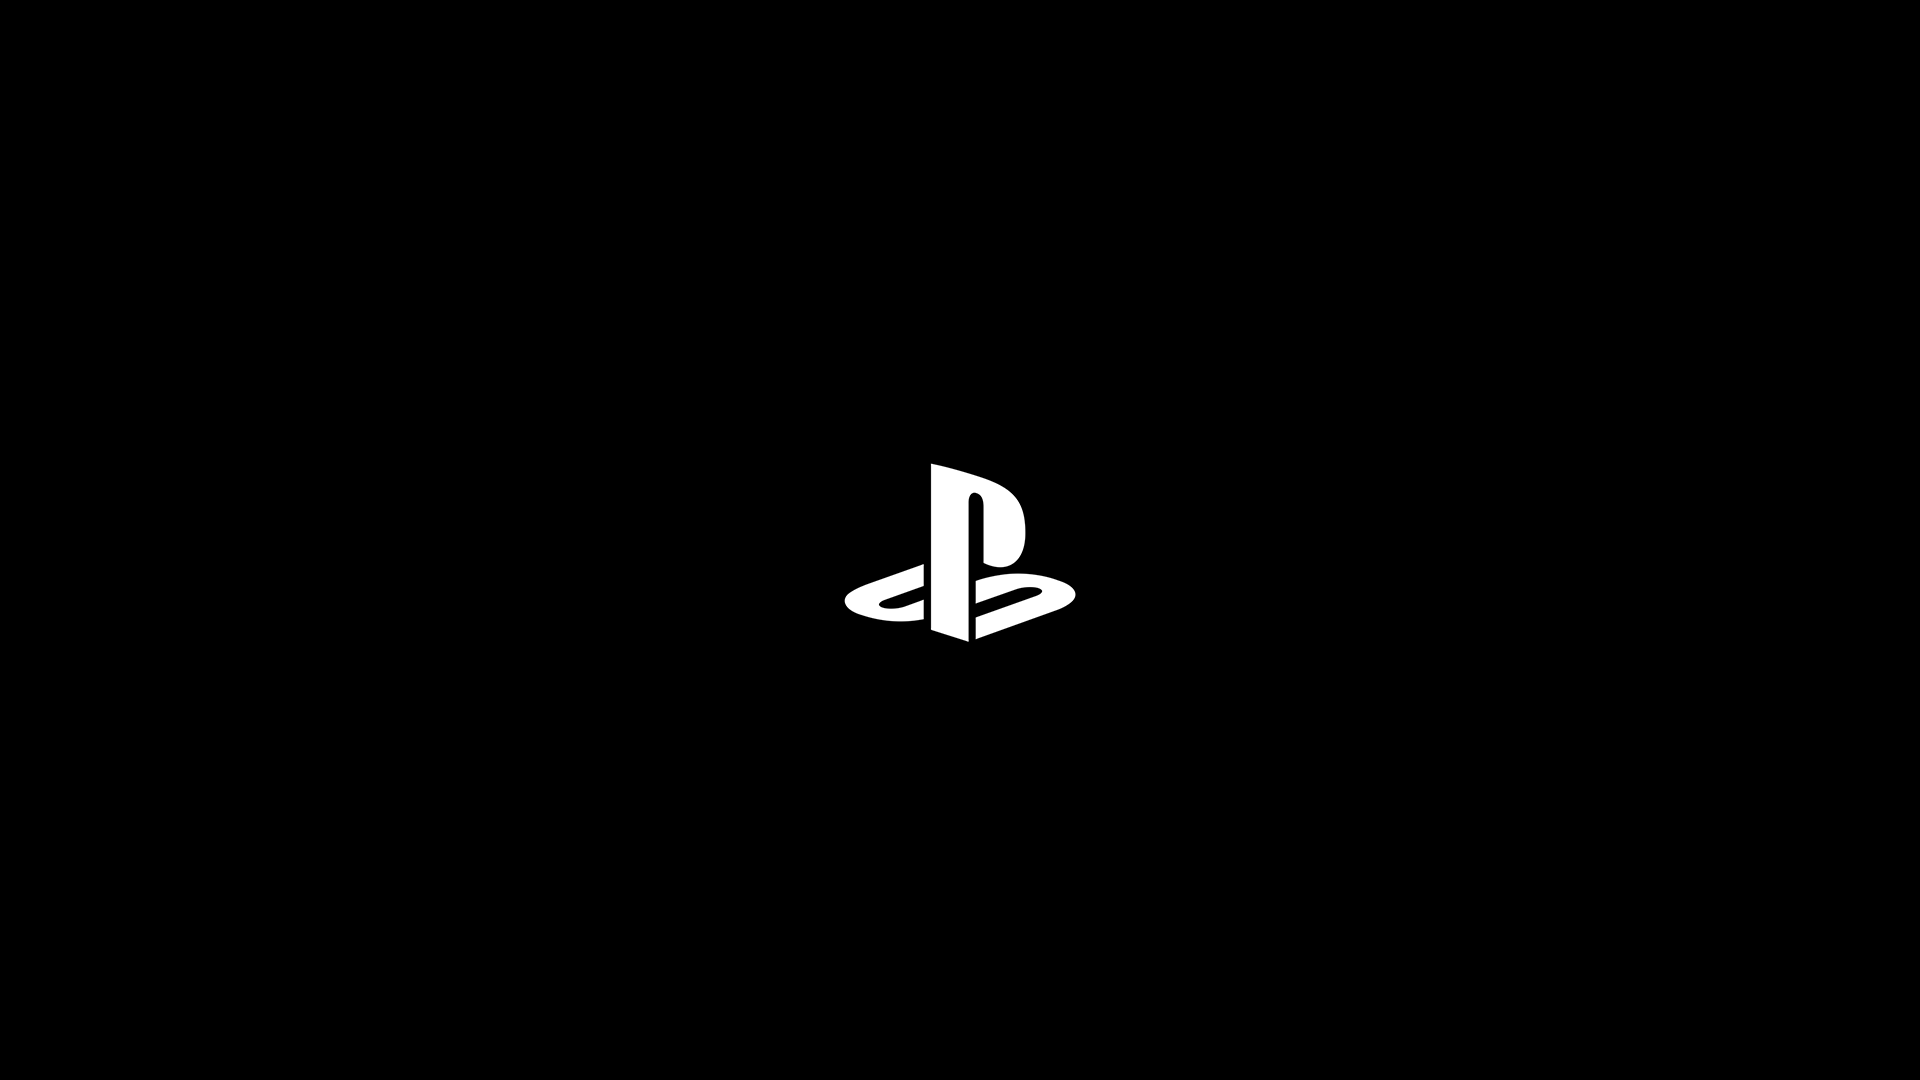 PS4 Pro High Resolution Wallpapers 1080p/4K